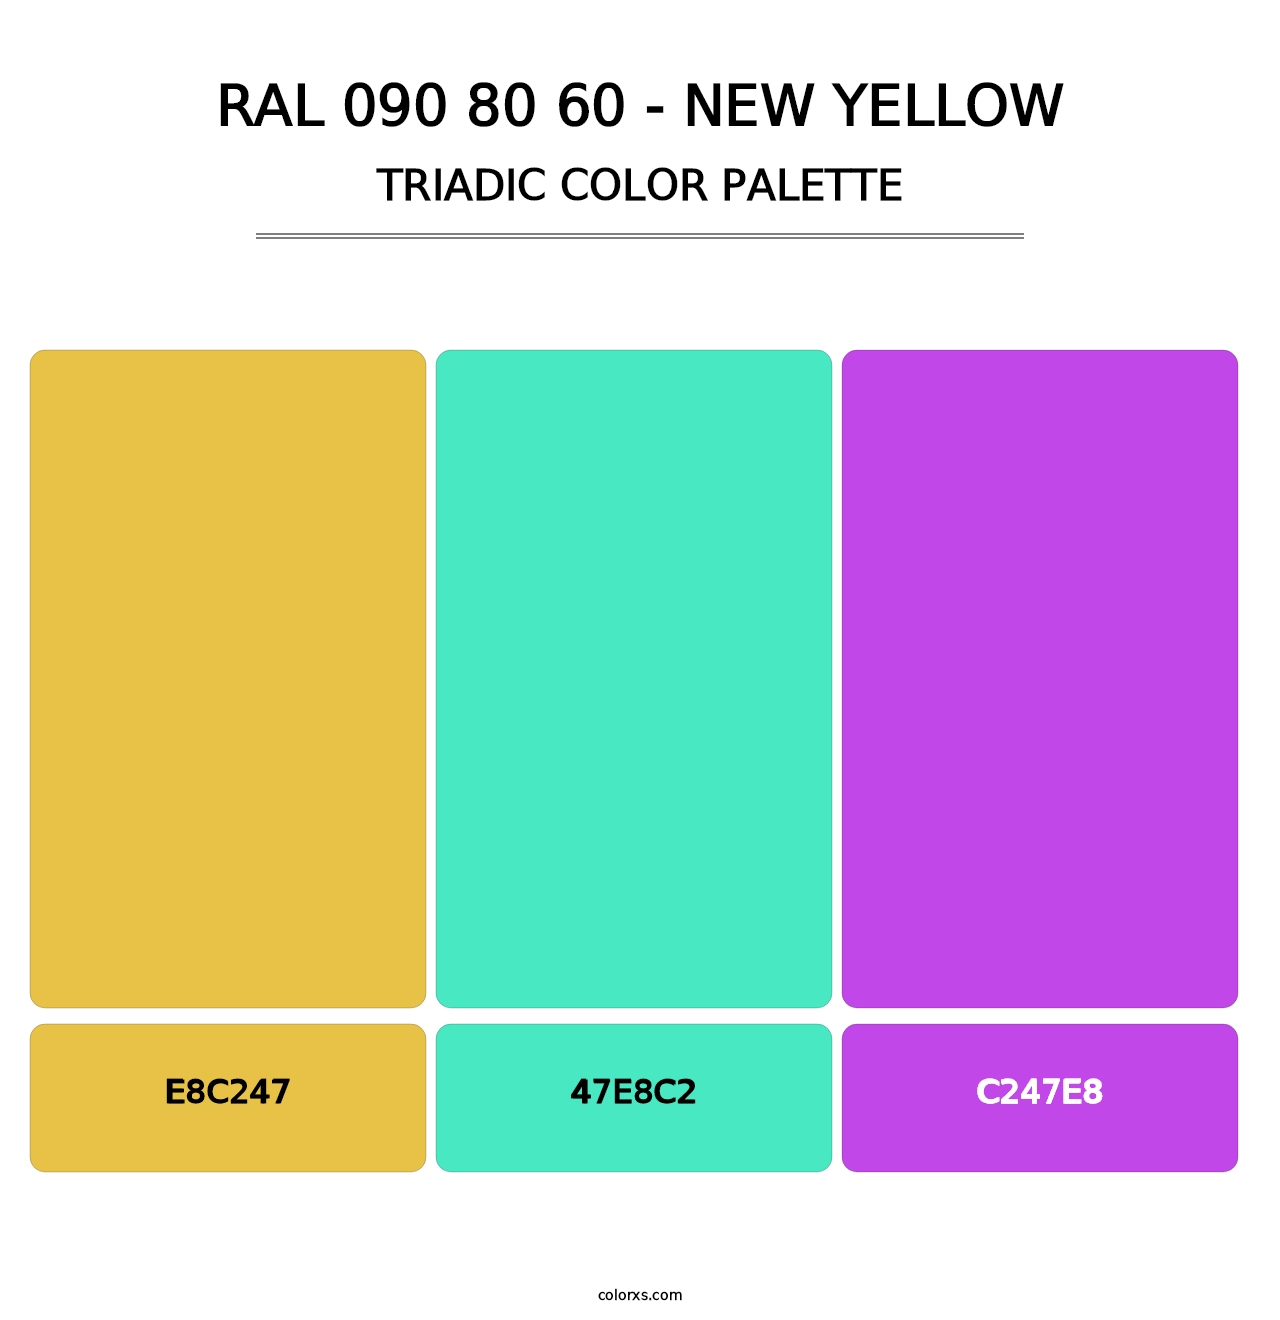 RAL 090 80 60 - New Yellow - Triadic Color Palette